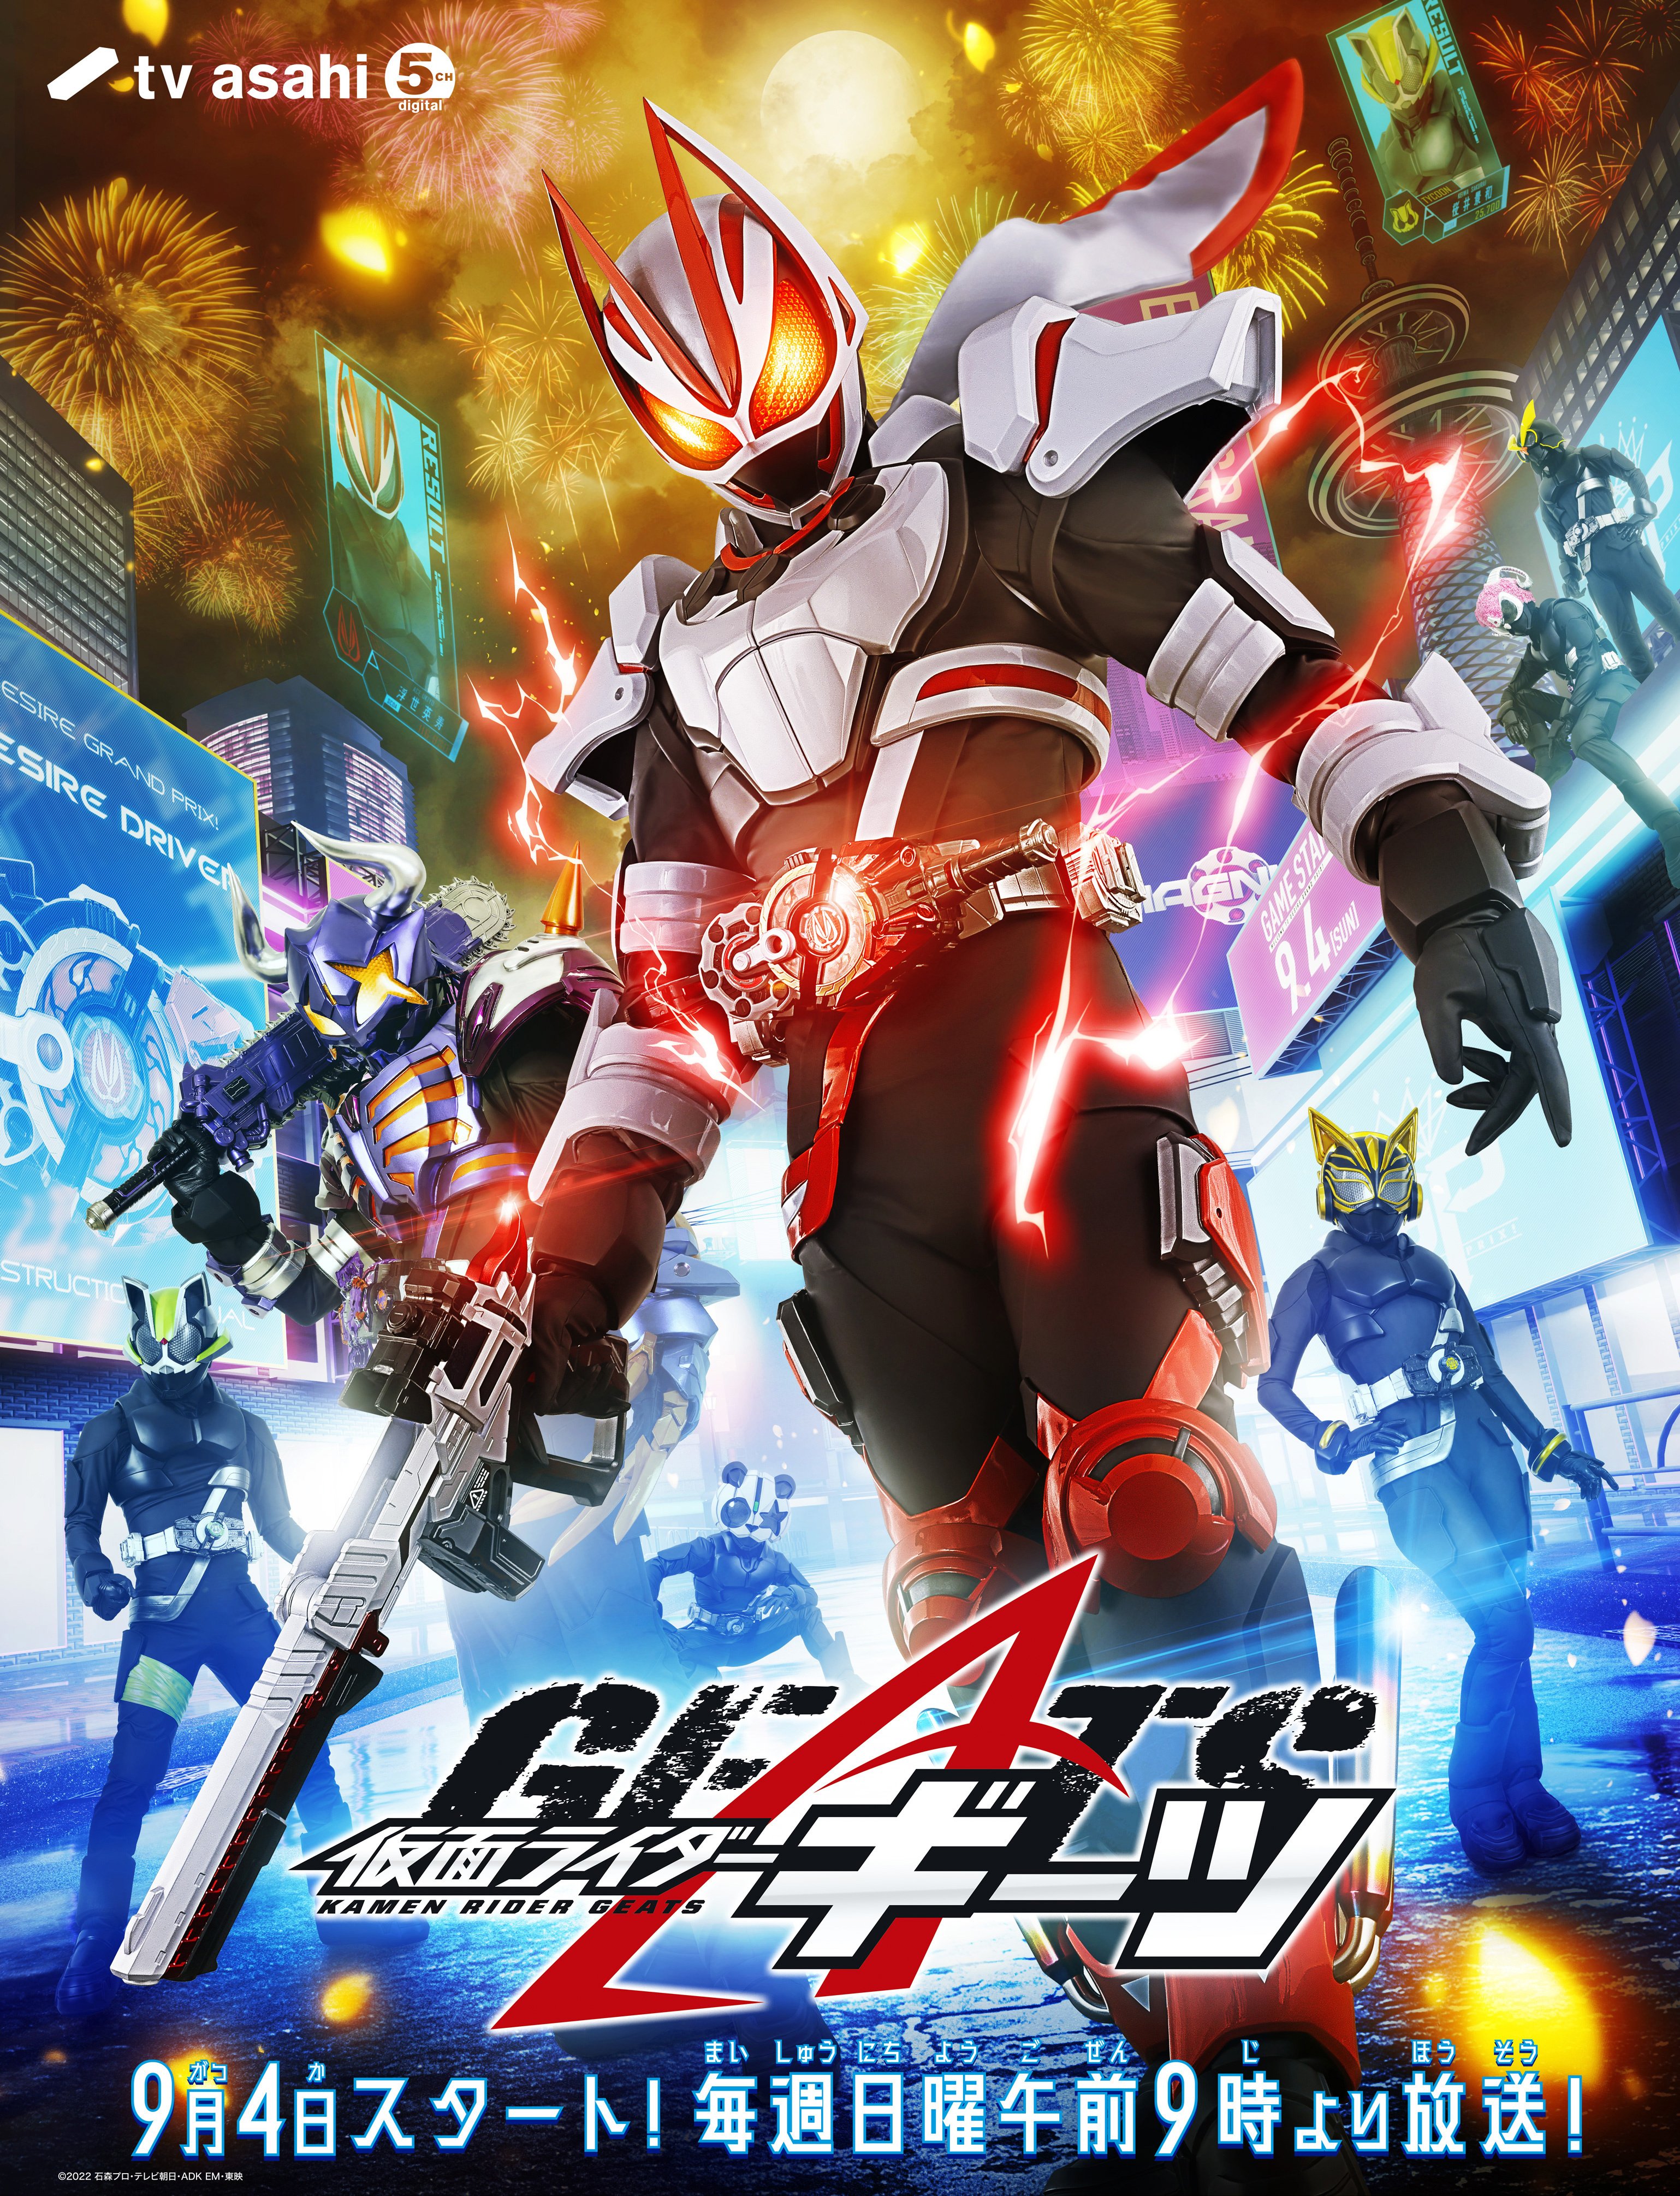 Kamen Rider Saber and Kamen Rider Zero-One Movie Blu-ray Collection  Announced For Release – The Tokusatsu Network